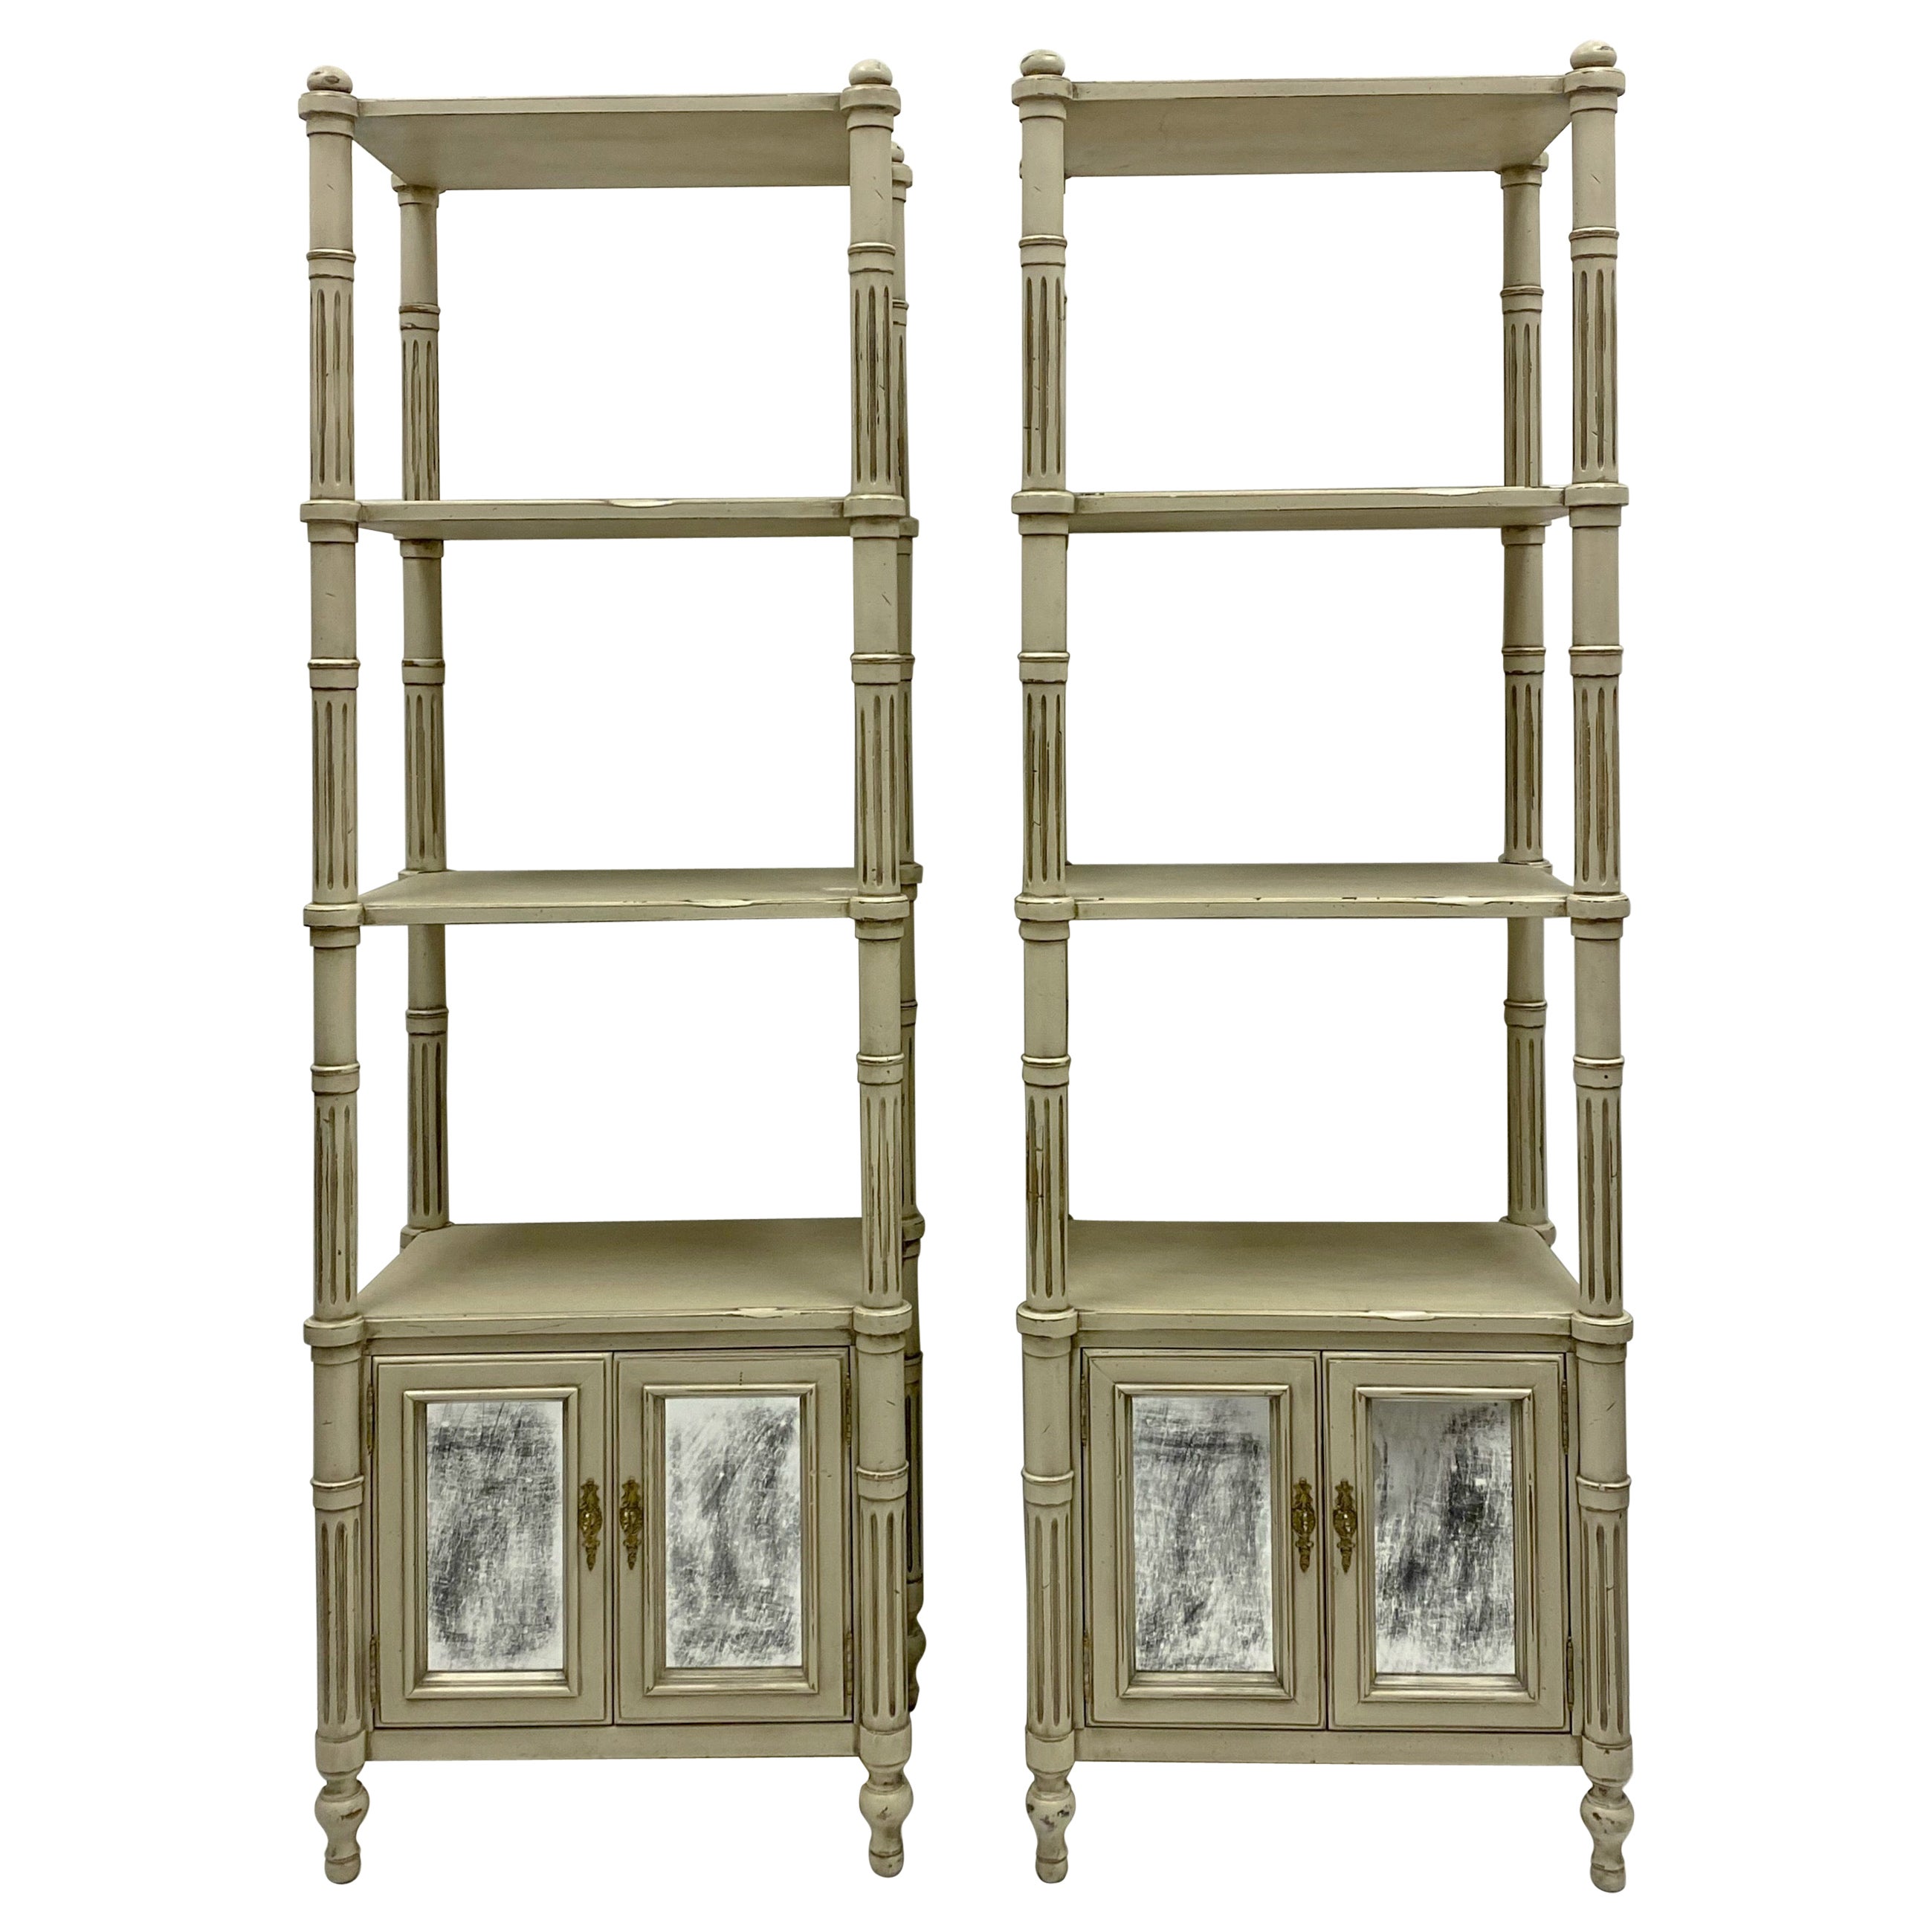 Late 20th-C. Gustavian or Swedish Style Etageres / Bookshelves / Cabinets, Pair For Sale